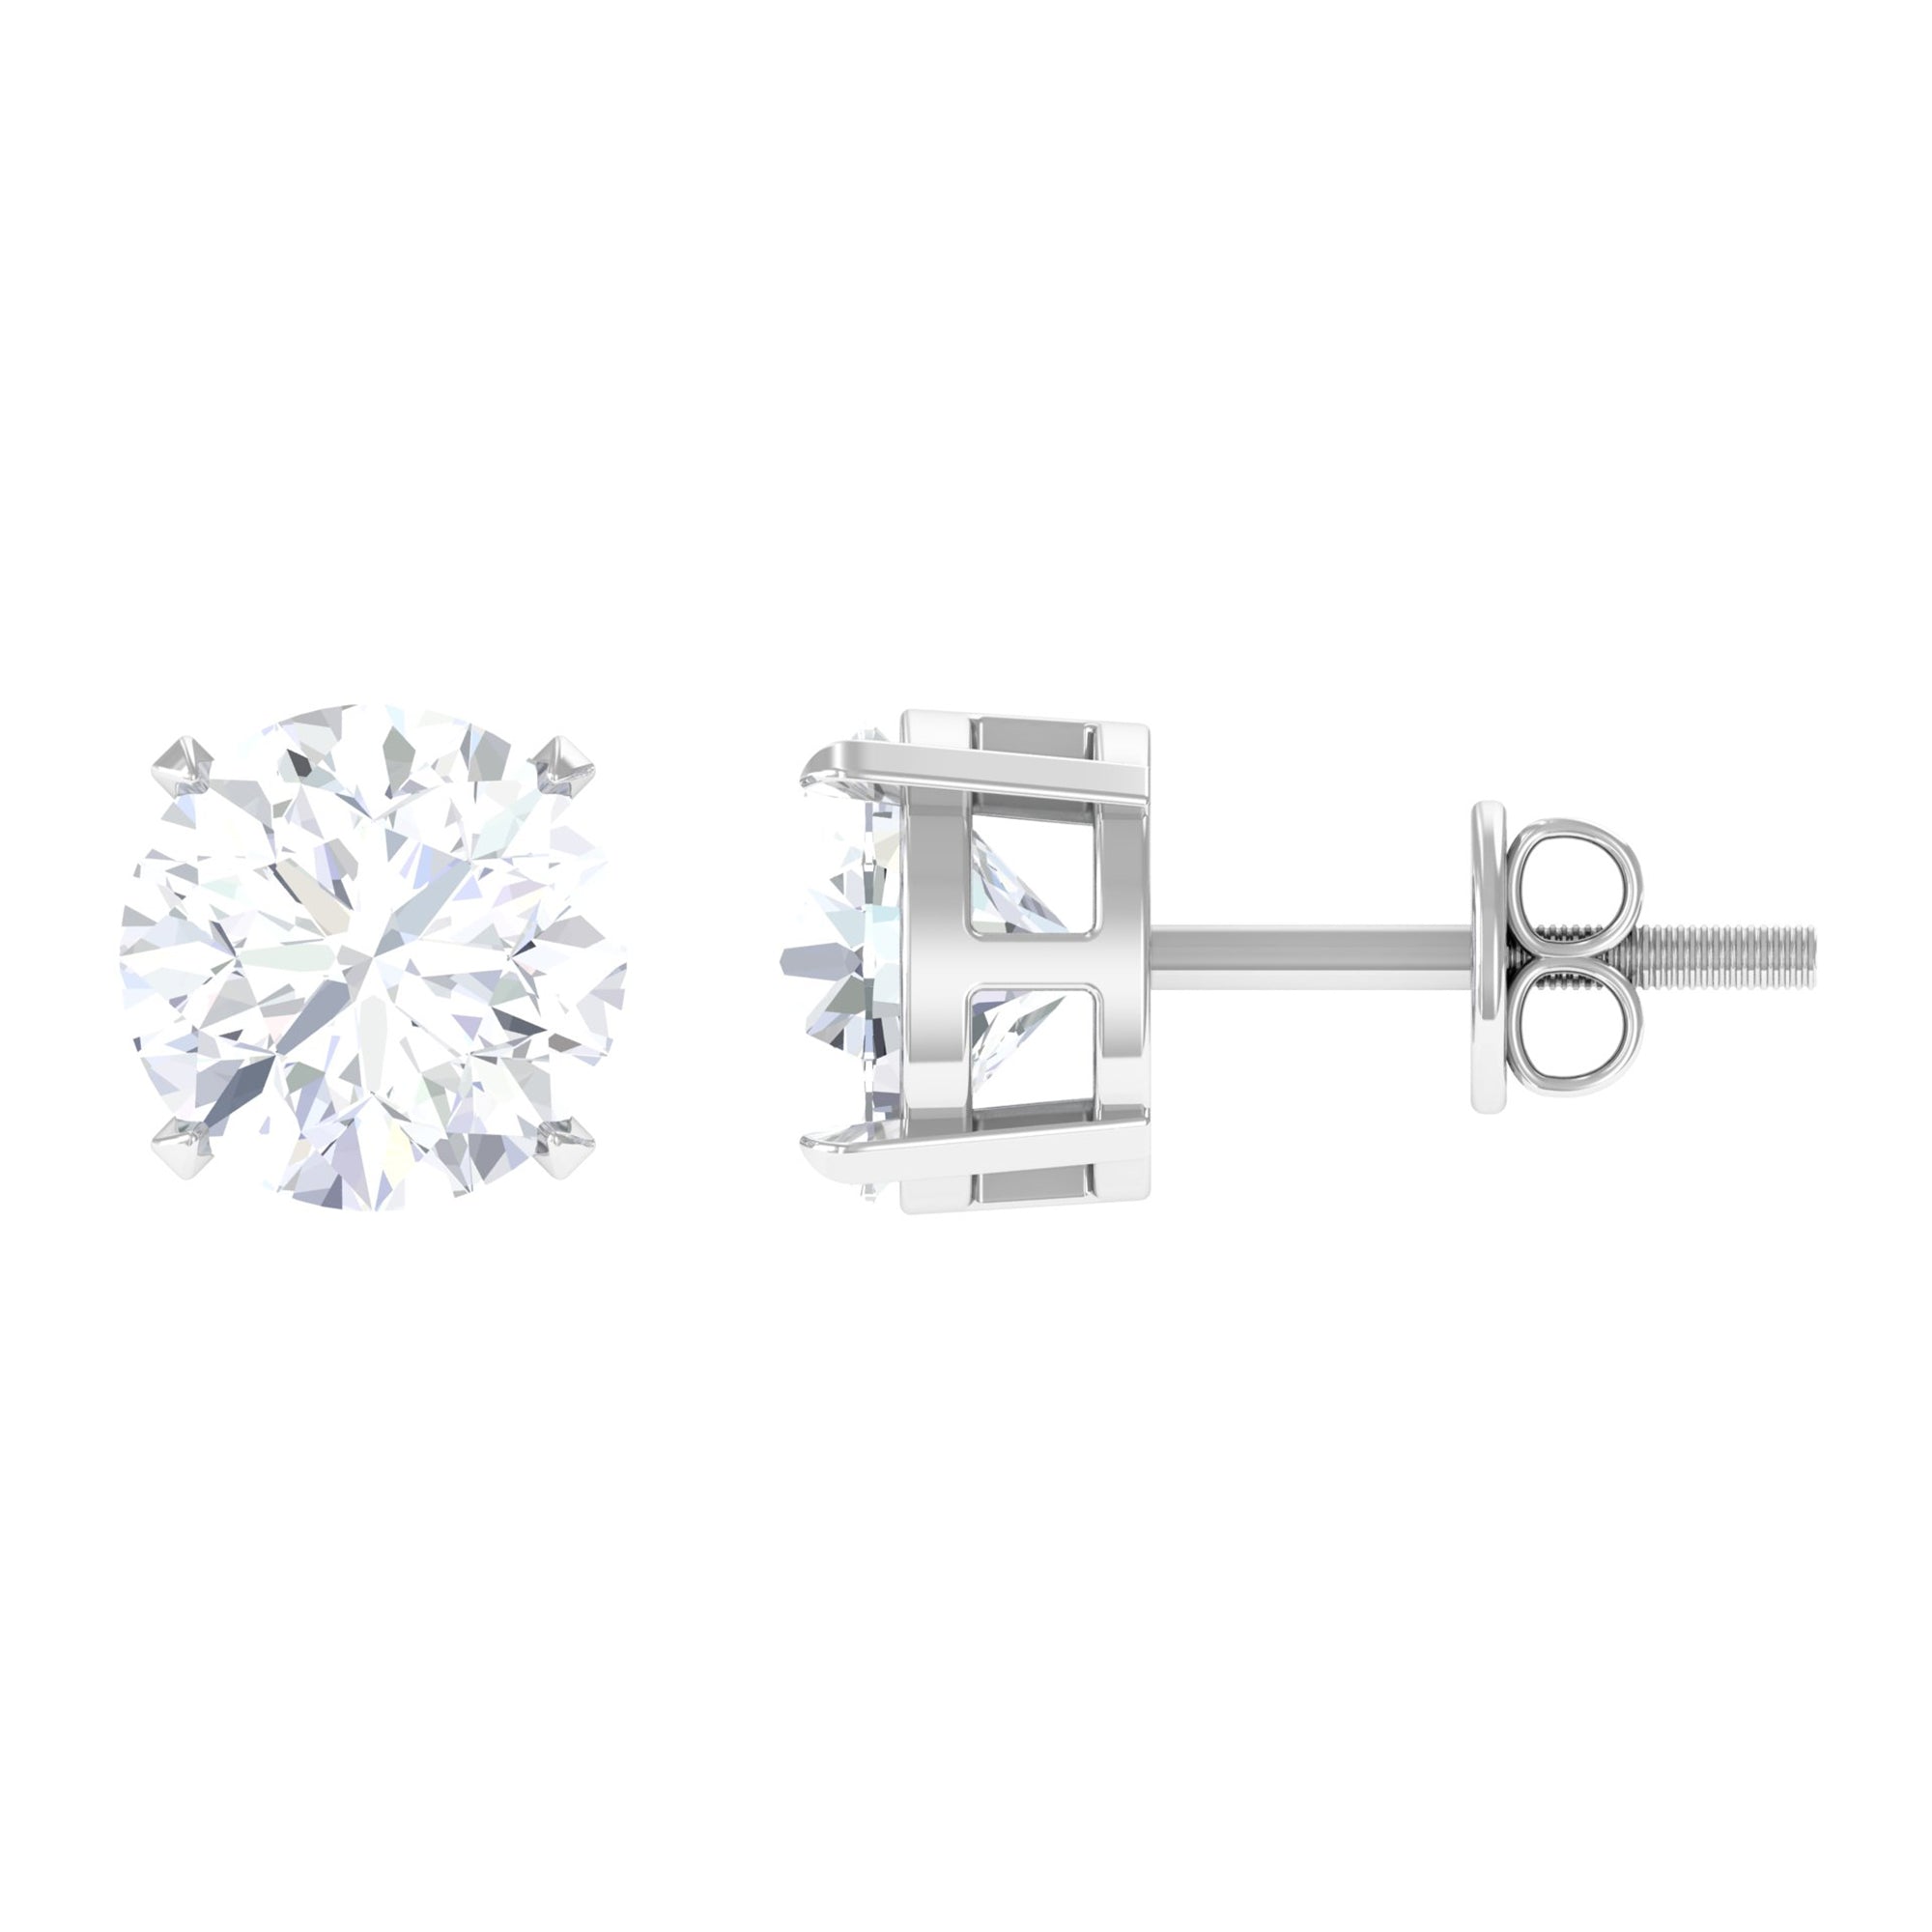 Round Moissanite Solitaire Stud Earrings in Claw Setting Moissanite - ( D-VS1 ) - Color and Clarity - Rosec Jewels